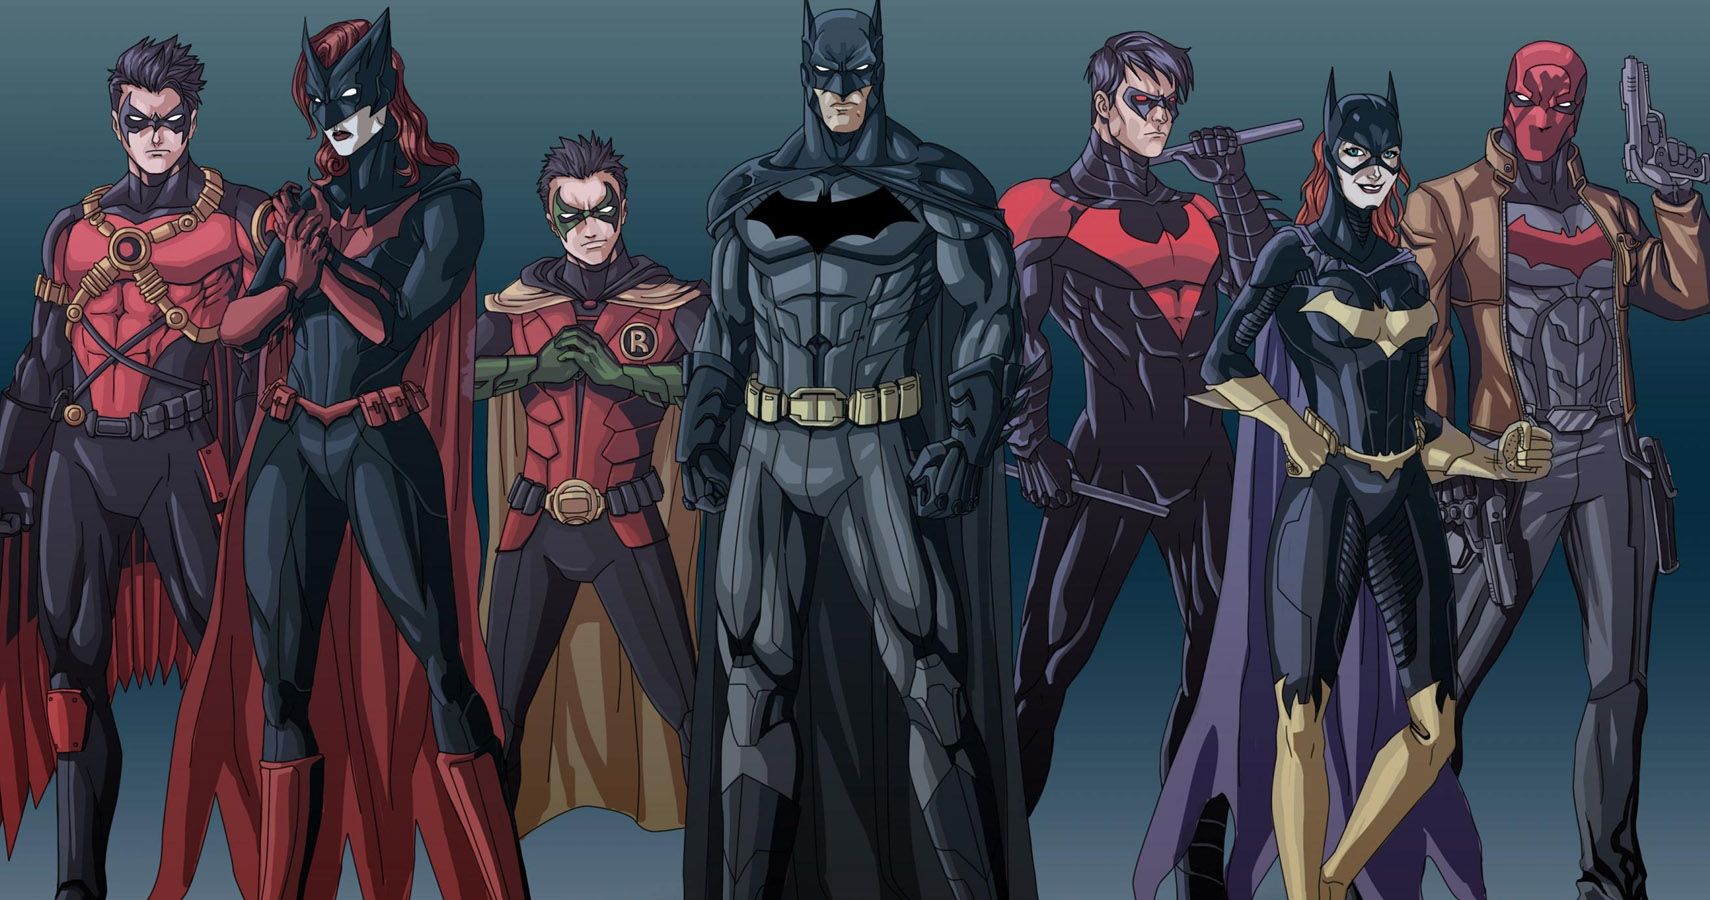 Batman: 11 Most Iconic Supporting Characters From The Comics